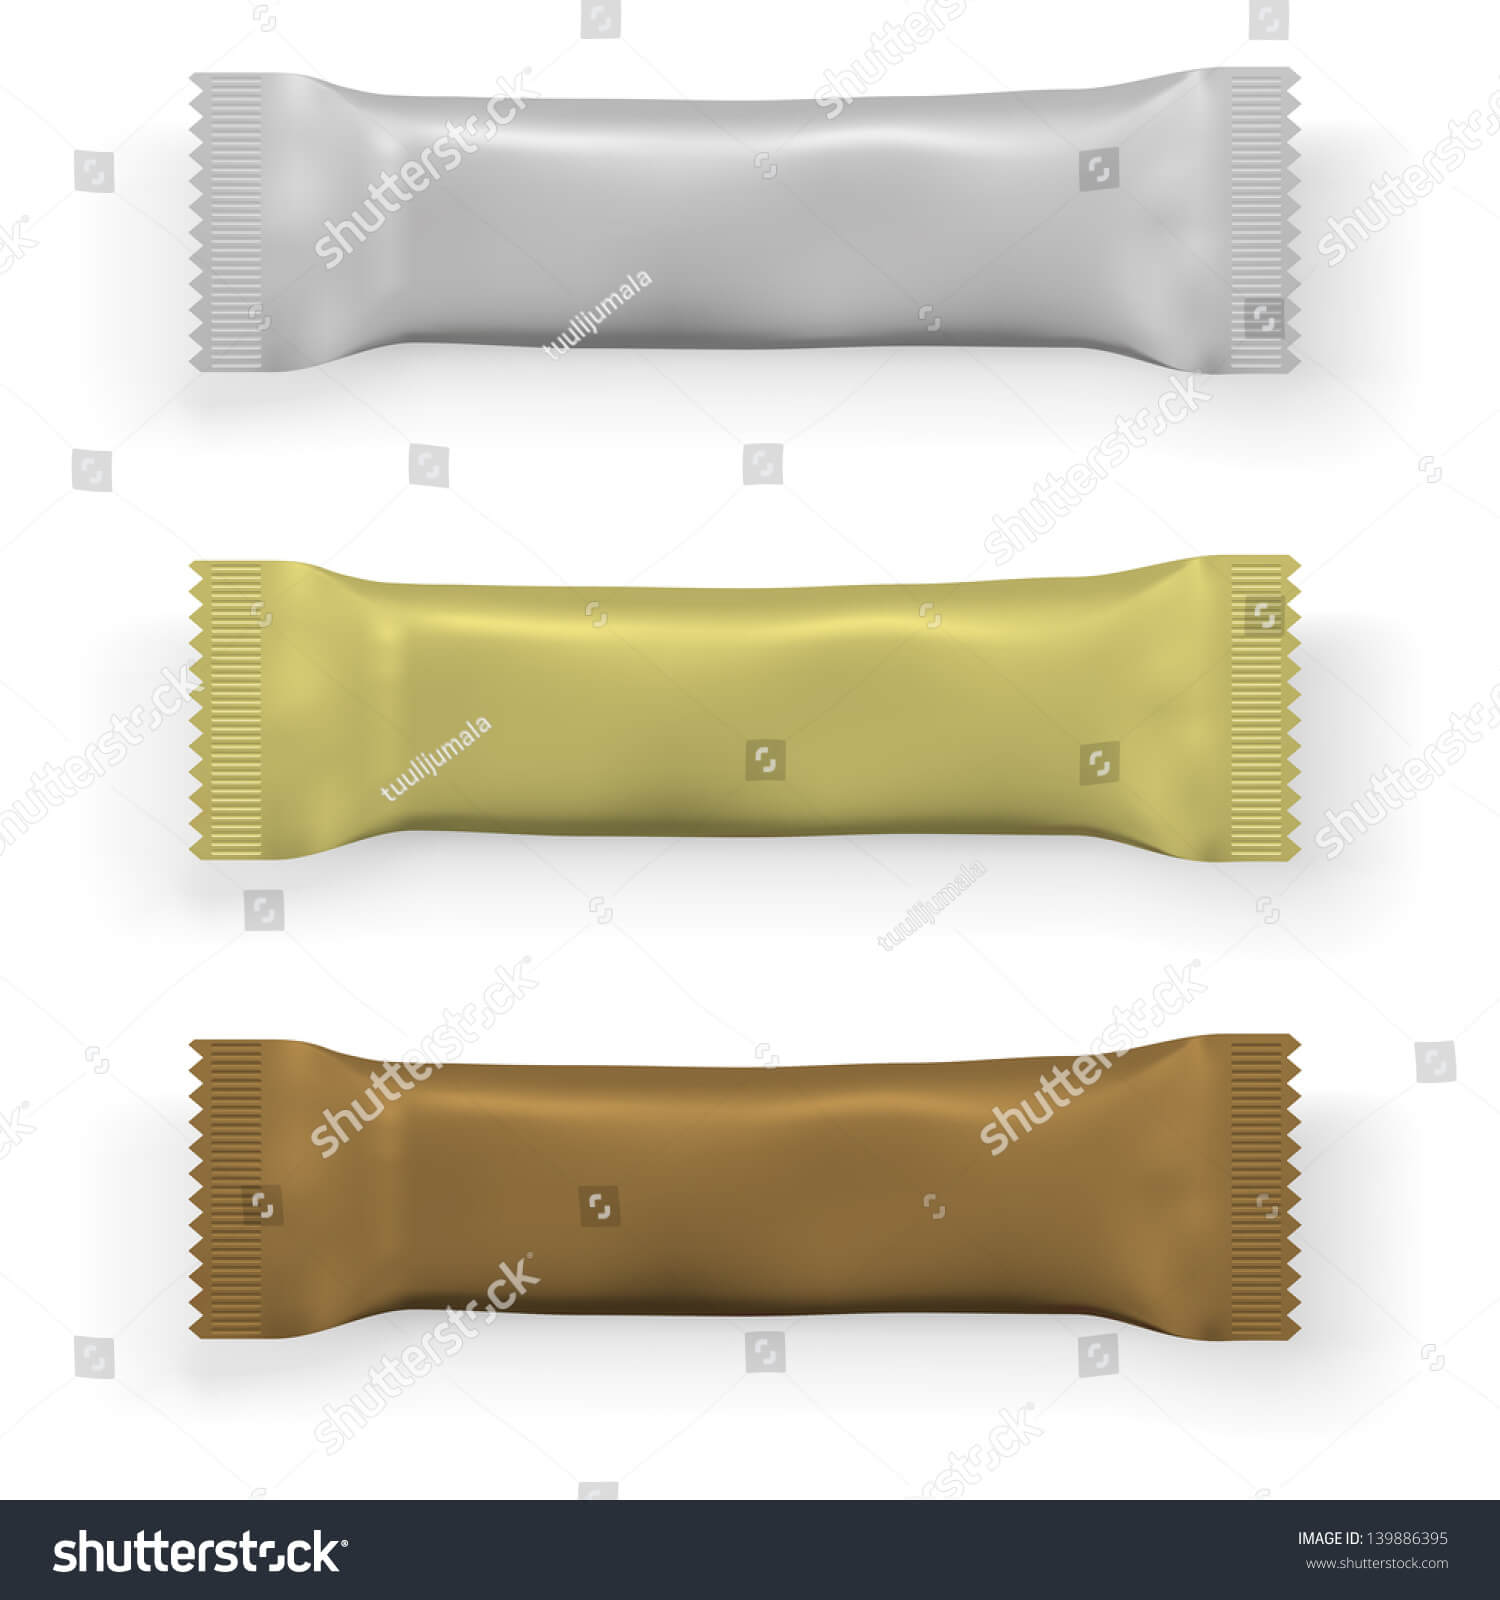 Blank Chocolate Protein Bar Packaging Template Stock Vector With Blank Packaging Templates